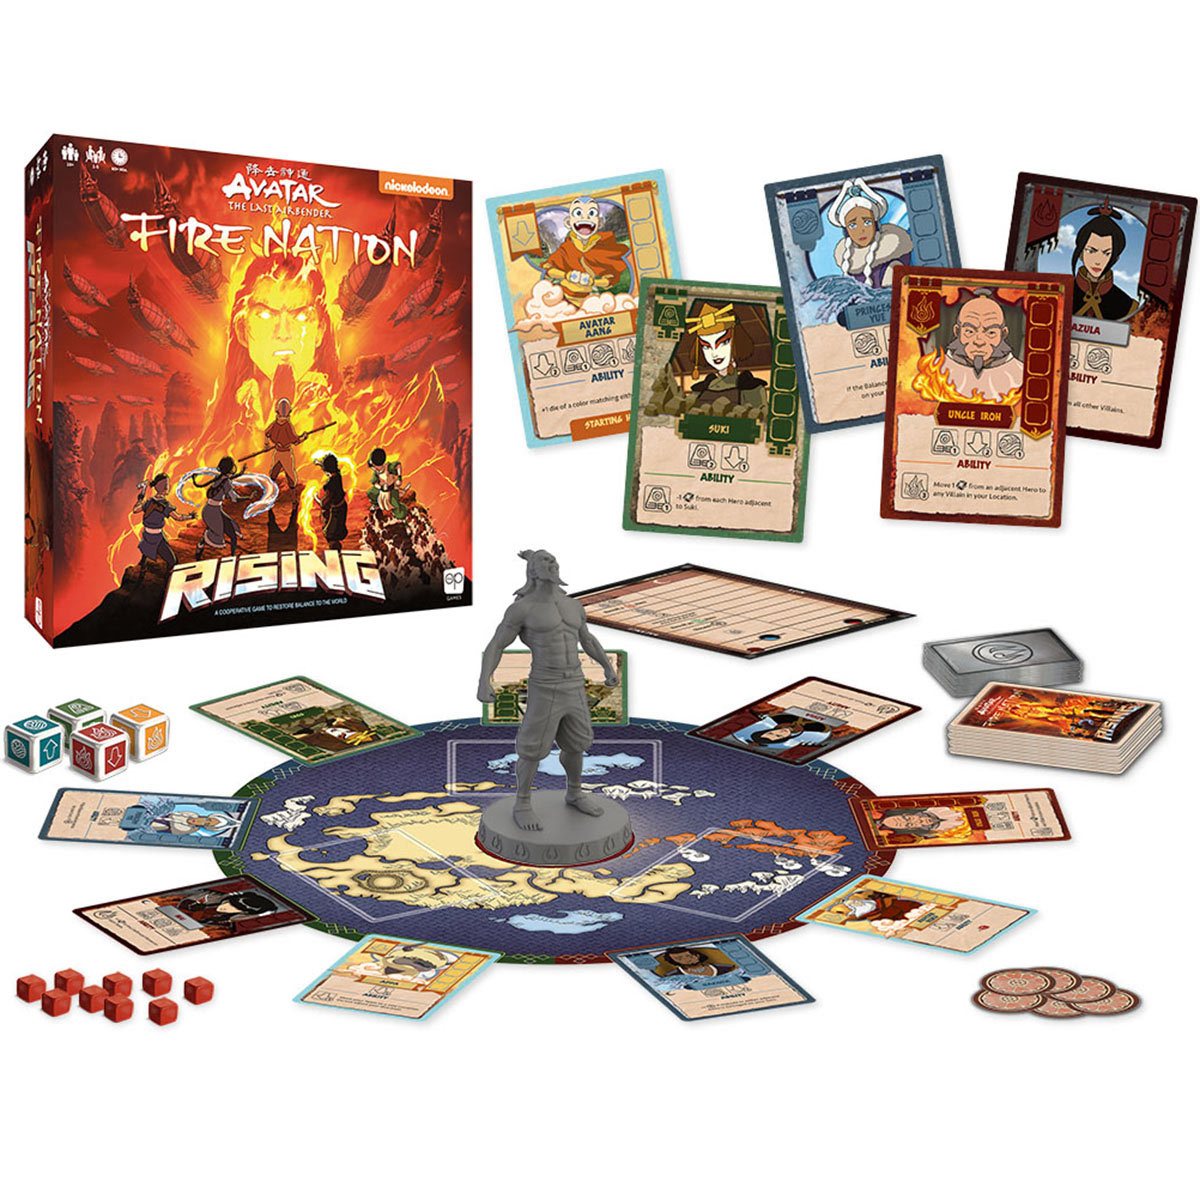 Stop the Fire Nation in This AVATAR THE LAST AIRBENDER Board Game  Nerdist